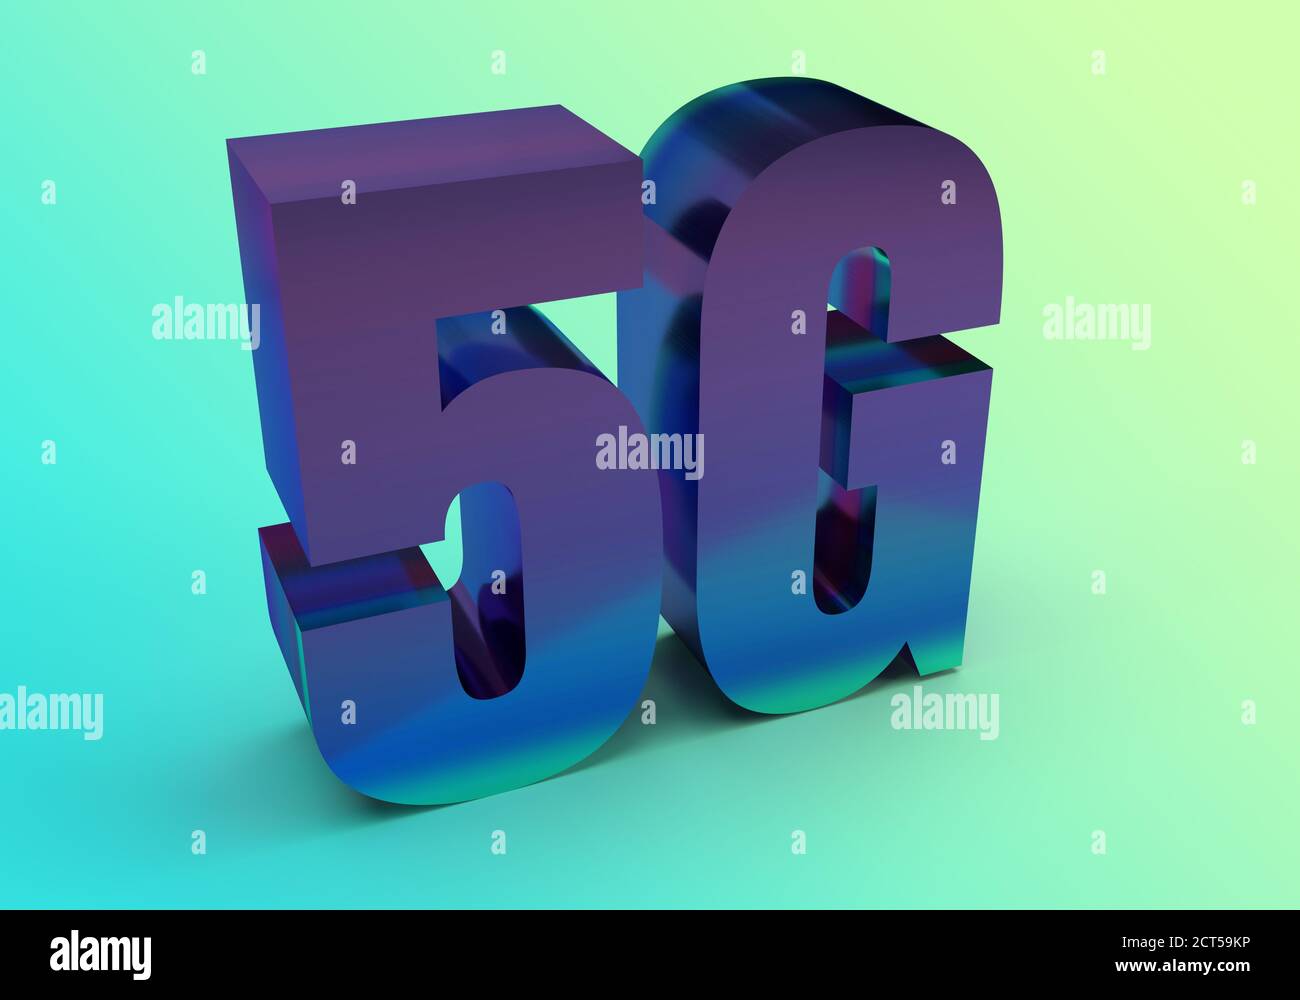 5g logo. Controversial new generation of ultra high-speed mobile network. 3 d illustation Stock Photo